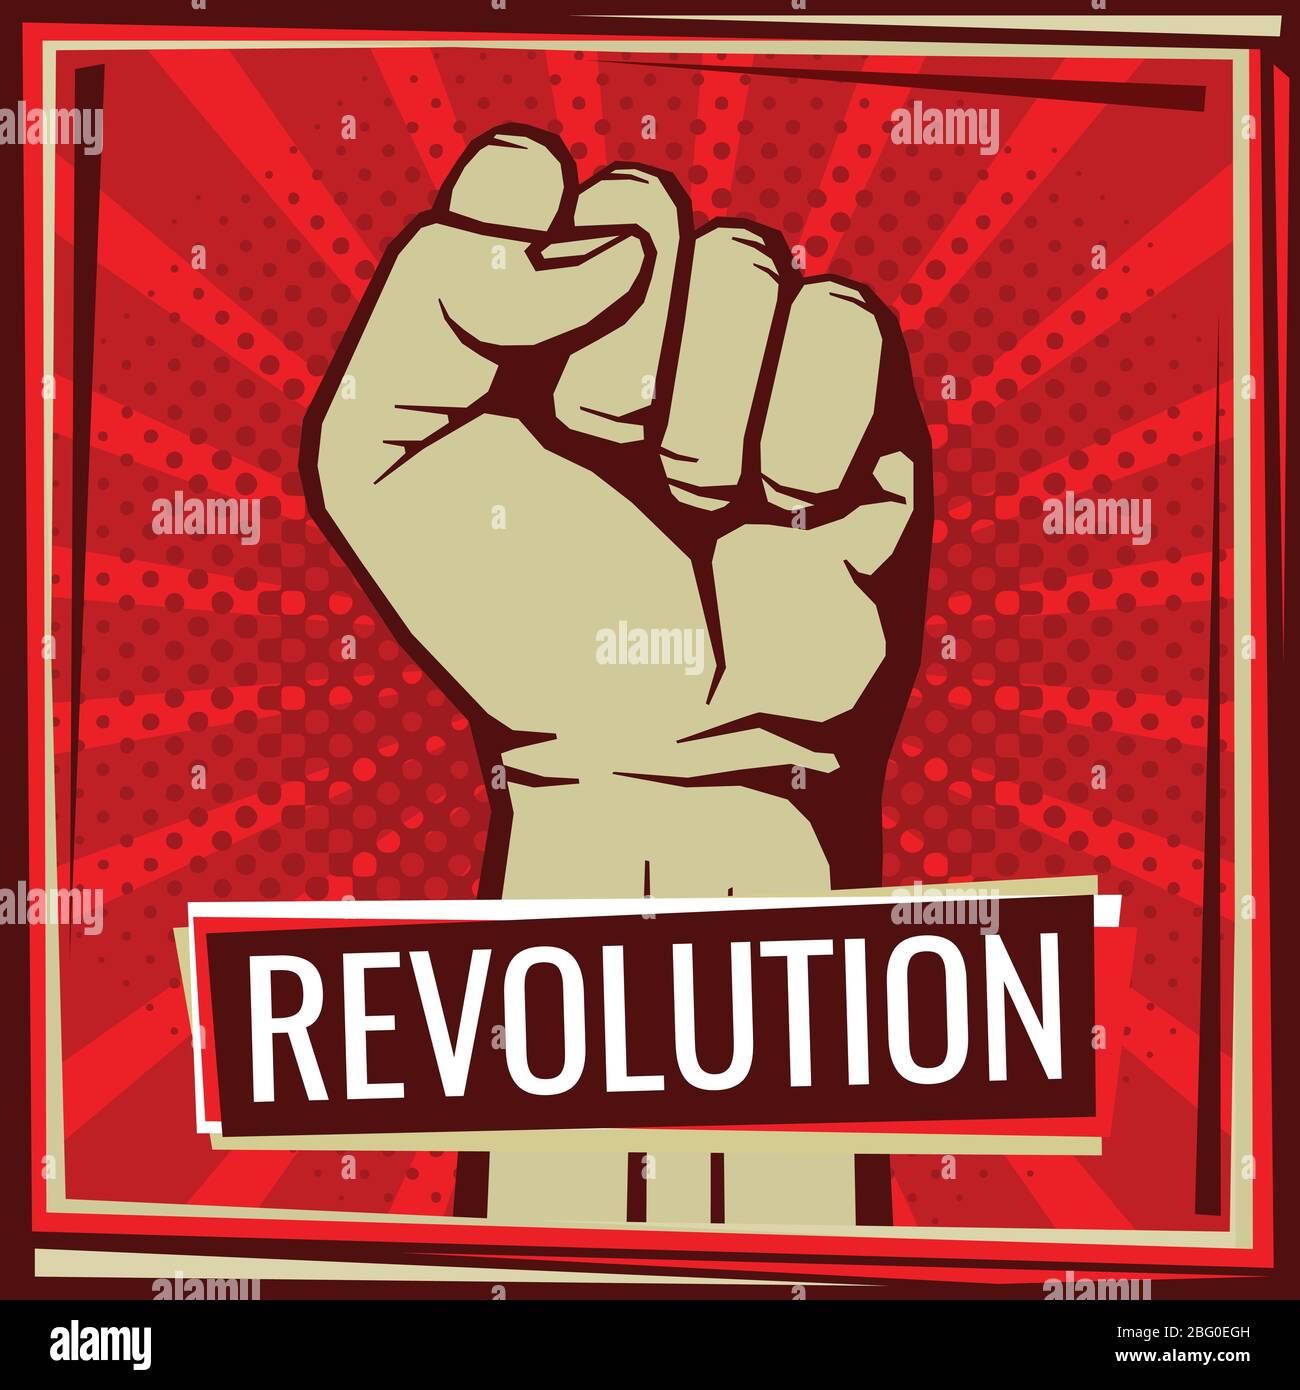 Revolution fight vector poster with worker hand fist raised. Illustration of fist worker, rebel and protest revolution Stock Vector